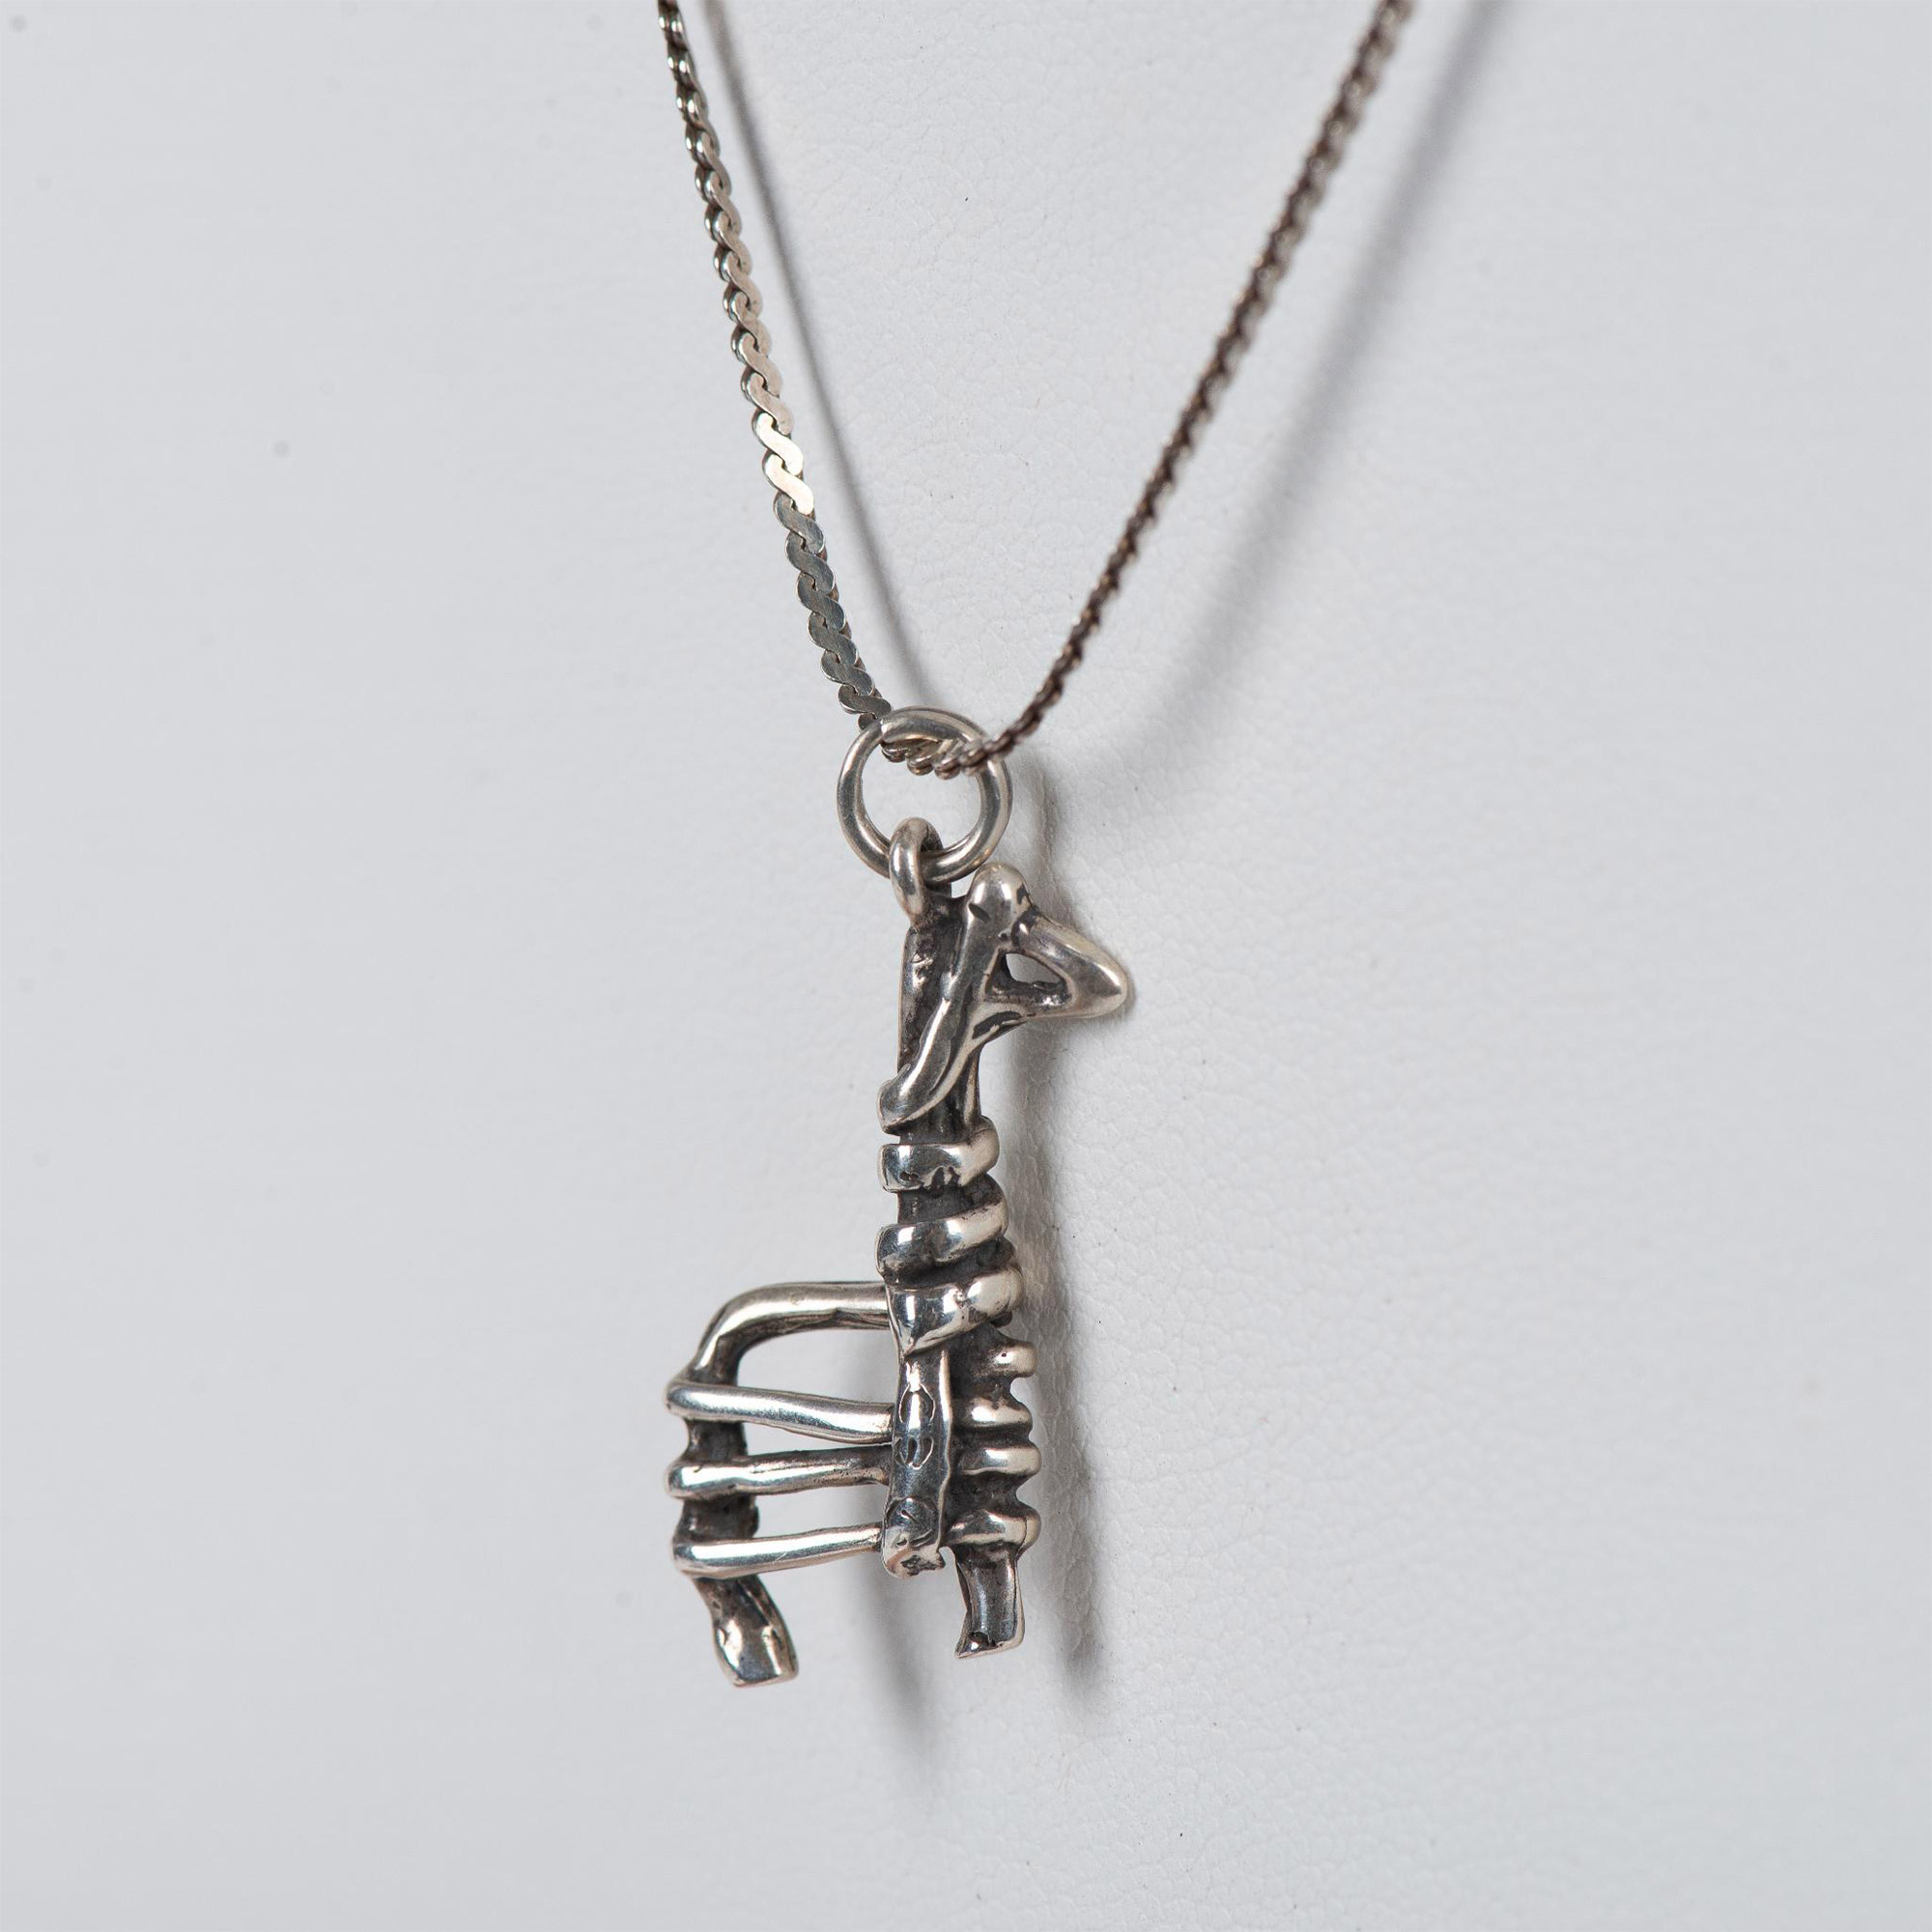 Silver Native American Stick Figure Horse Necklace - Image 5 of 7